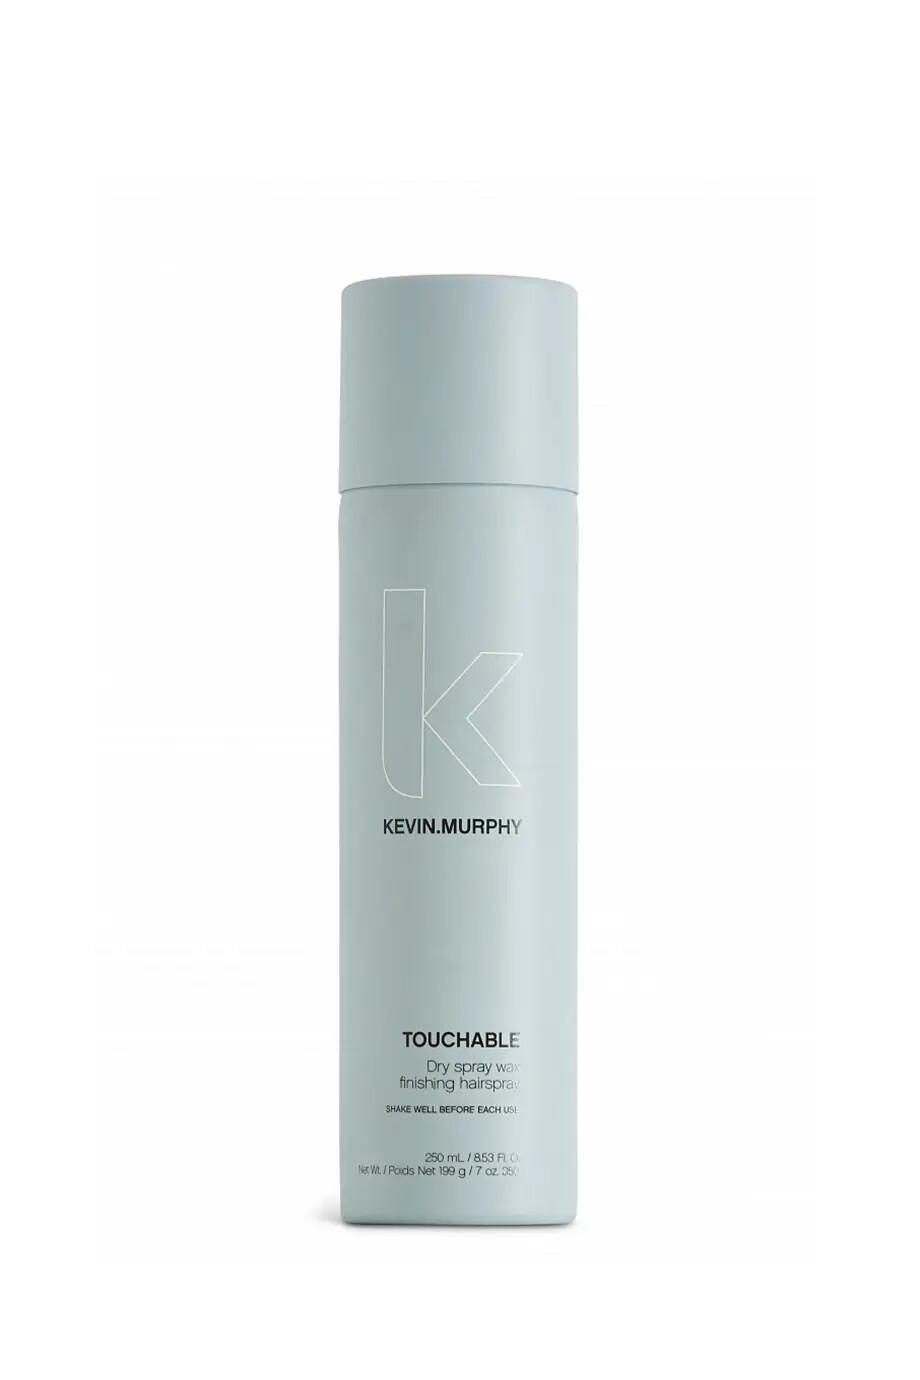 KEVIN.MURPHY touchable spray wax